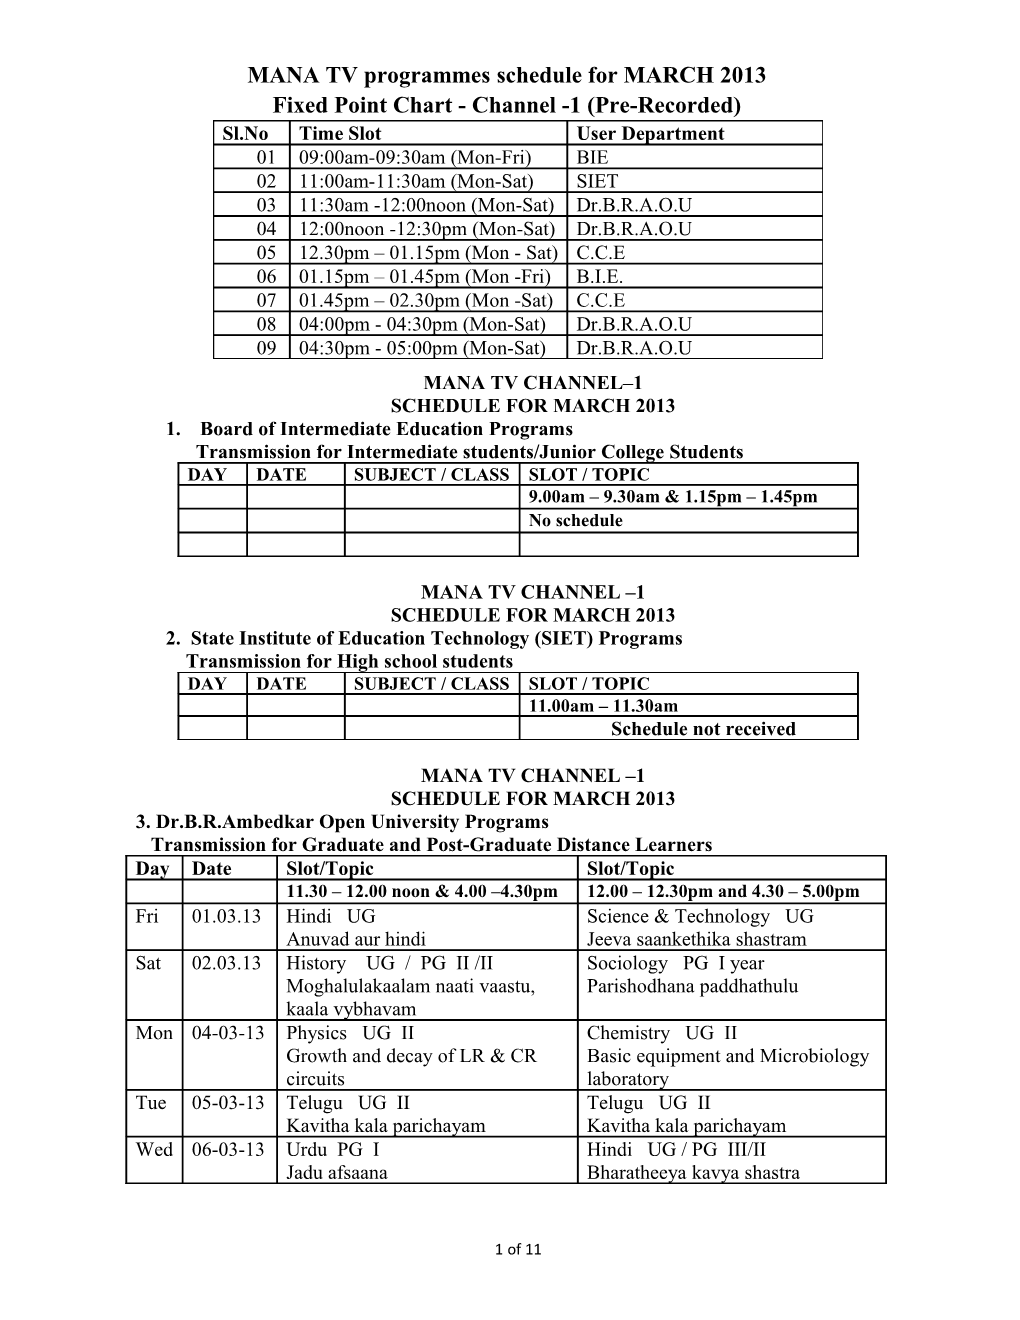 MANA TV Programmes Schedule for MARCH 2013